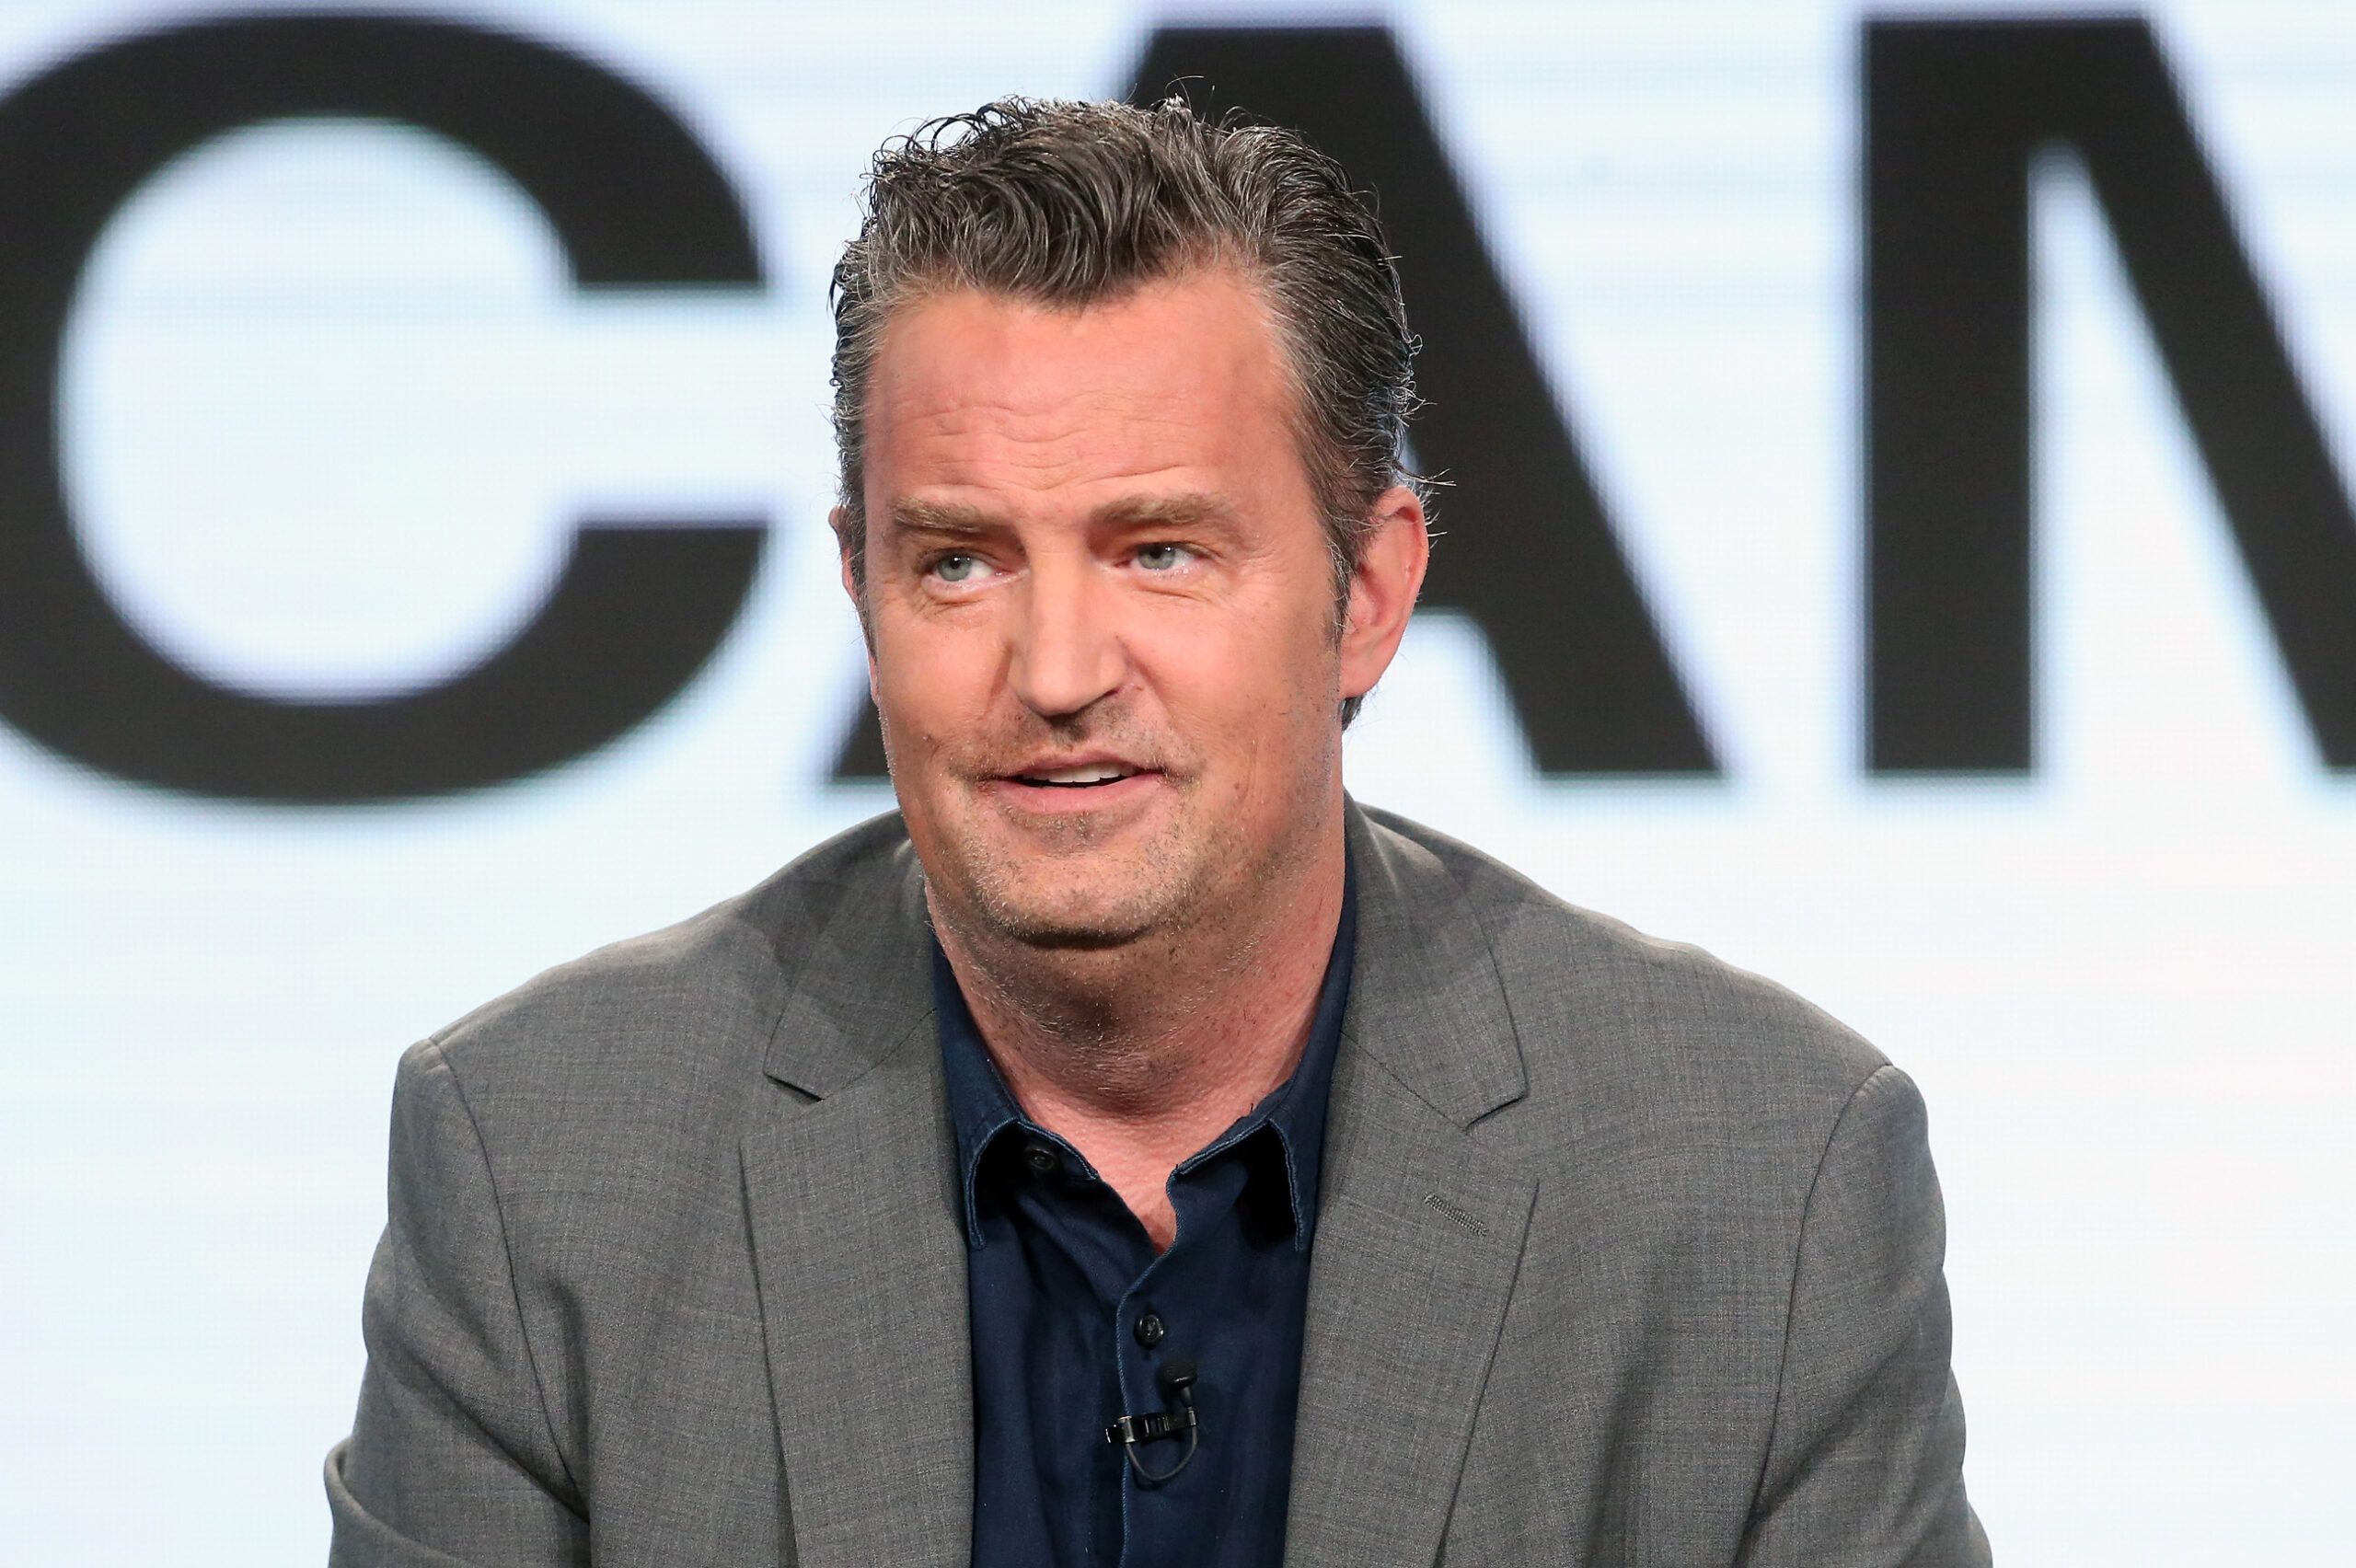 Matthew Perry Will Remove Keanu Reeves’ Name From His Memoir: ‘I Said A Stupid Thing’